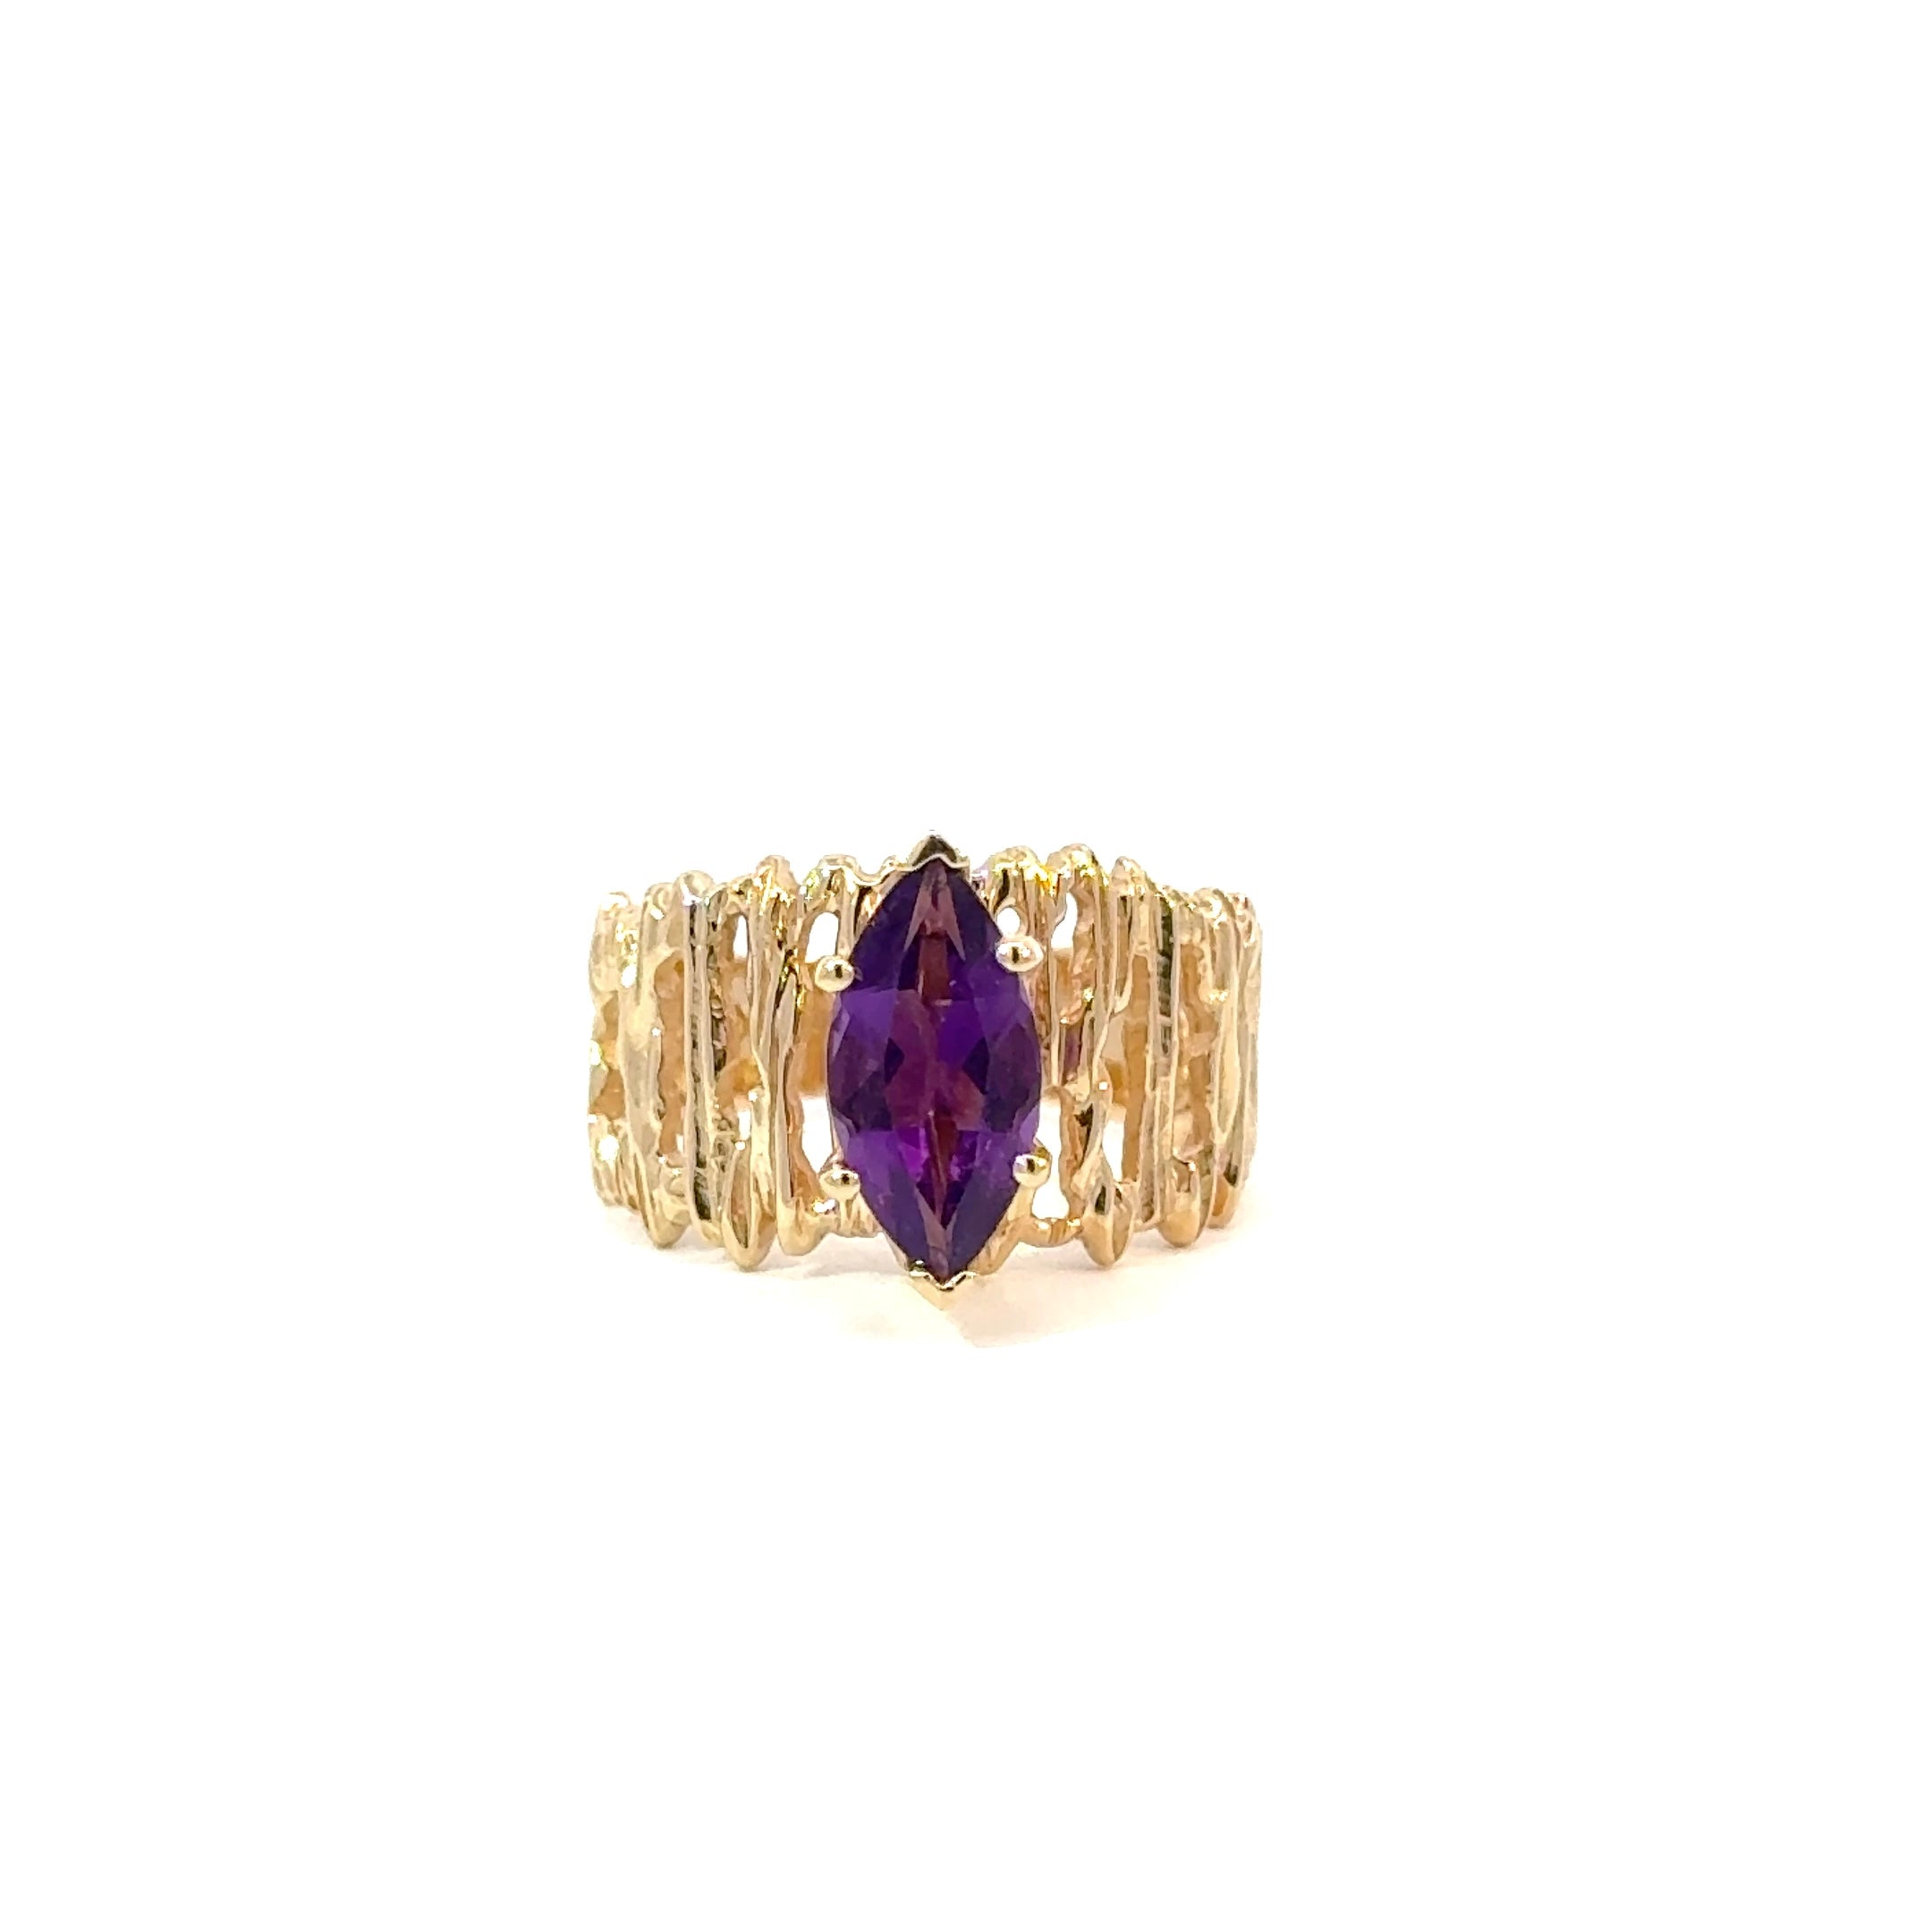 Marquise Cut Amethyst Ring set in 14K Gold, Vintage 1980s